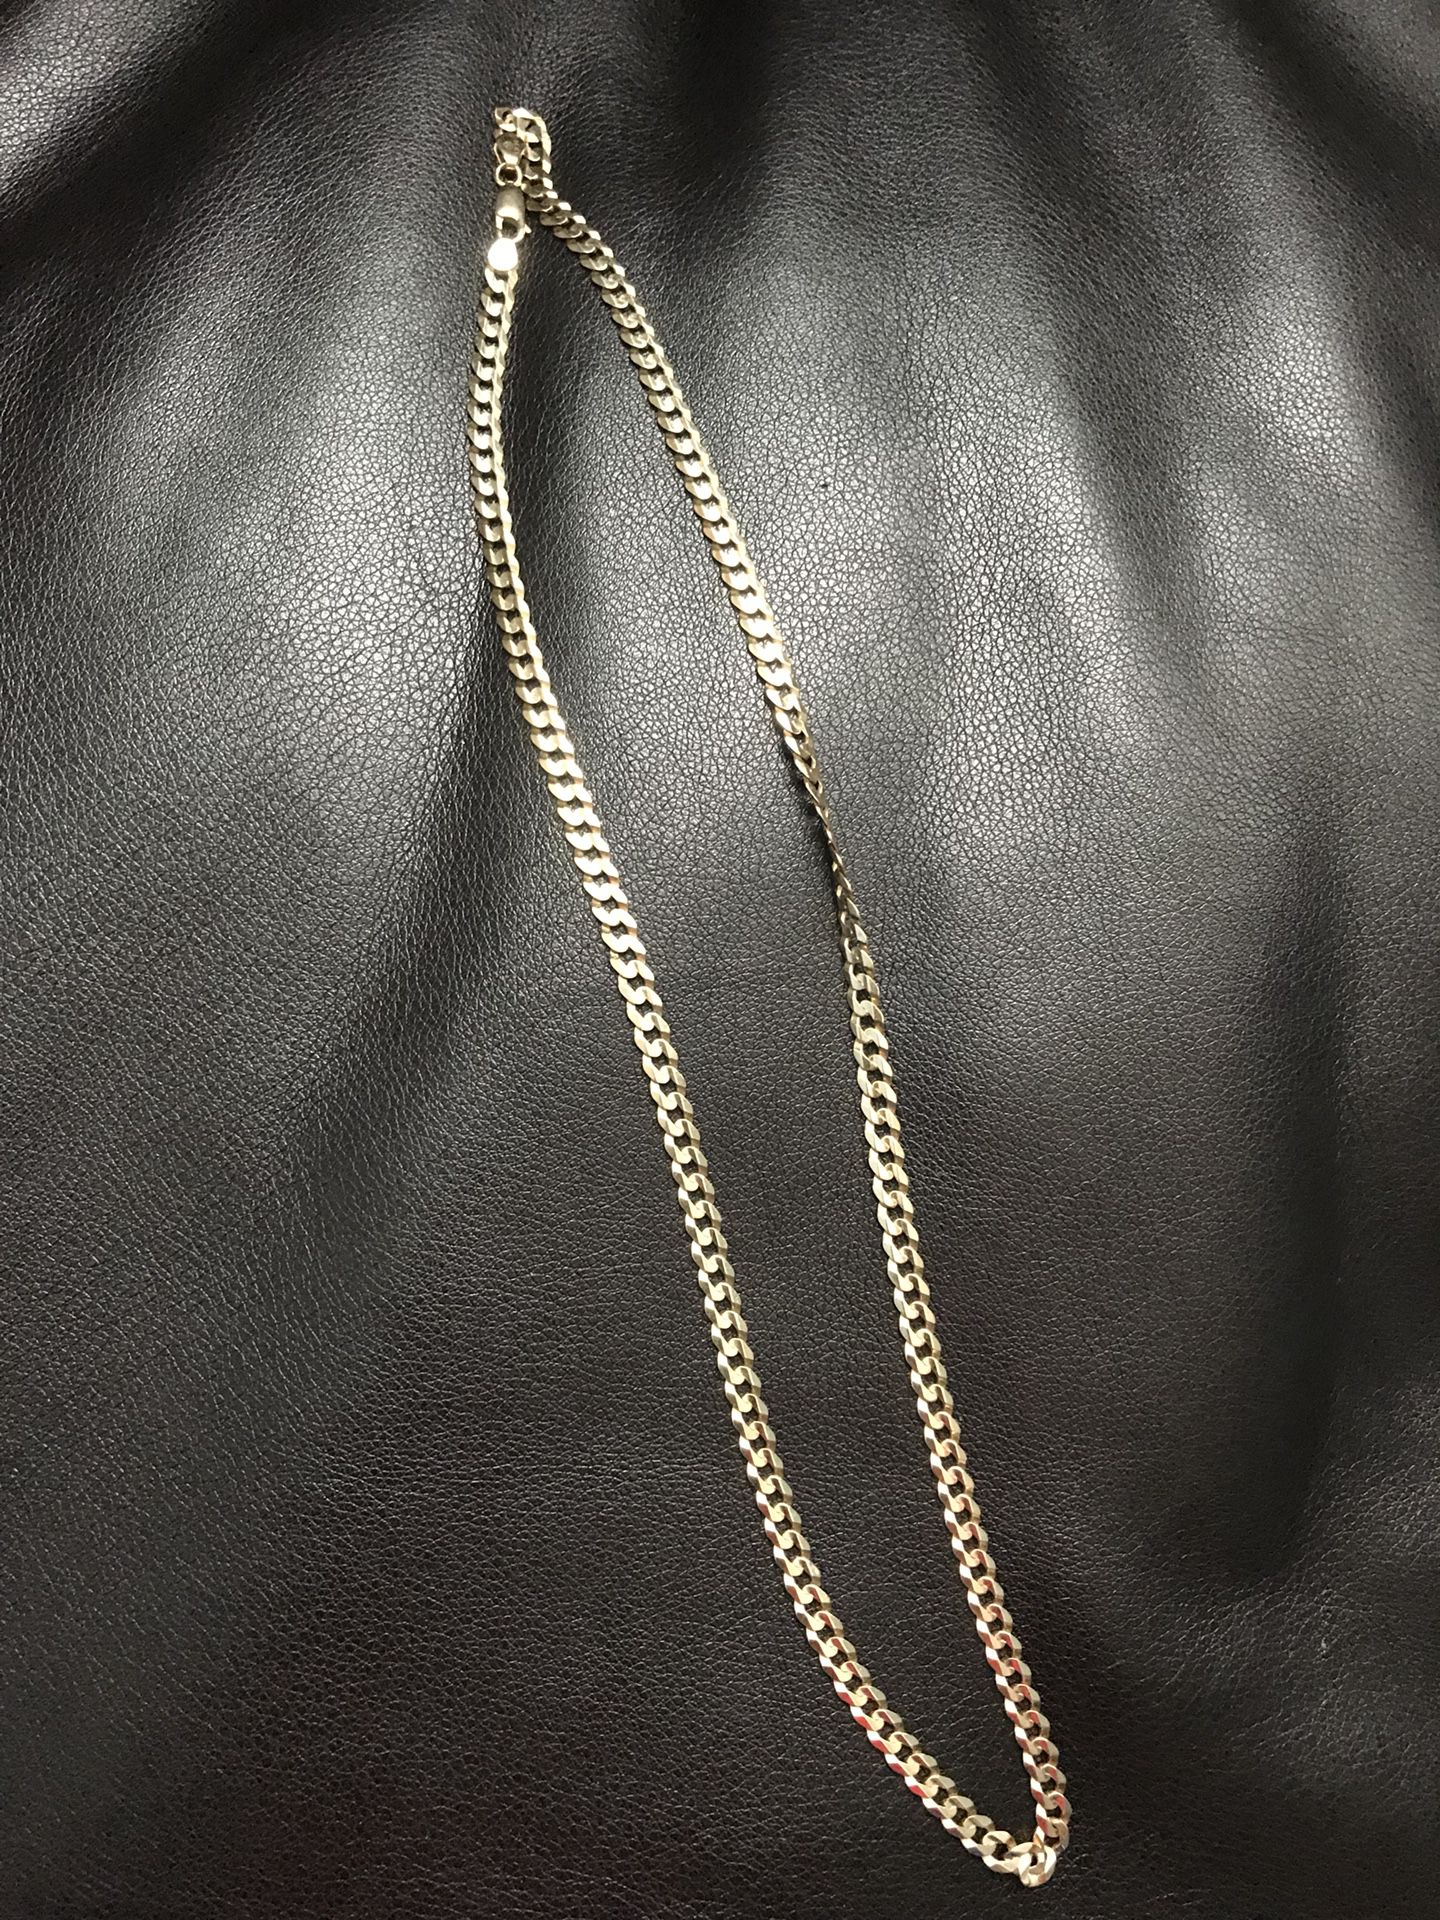 I have a Real solid 14kt Gold Chain.